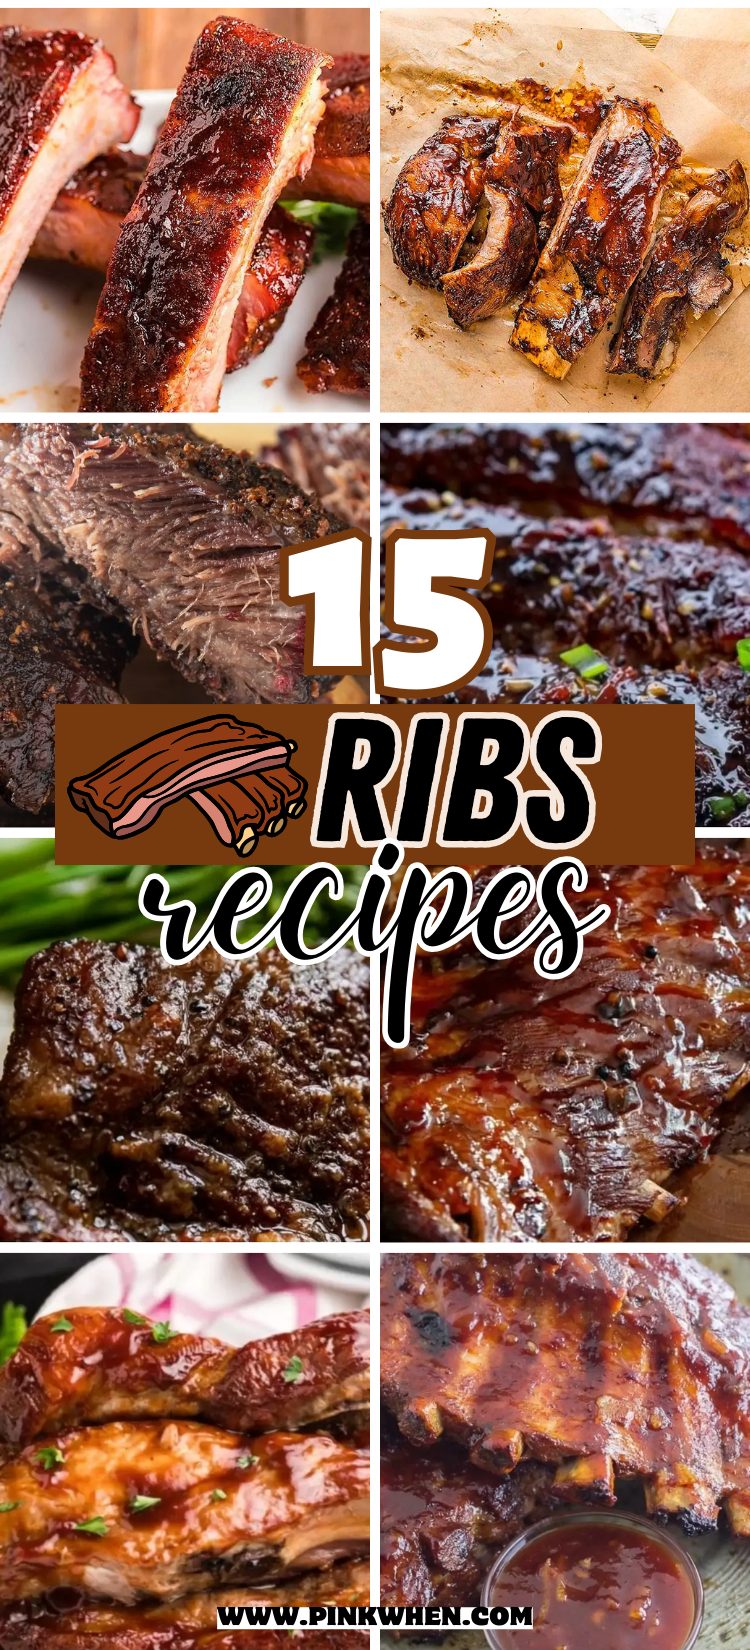 15 Ribs Recipes for Juicy, Succulent Results